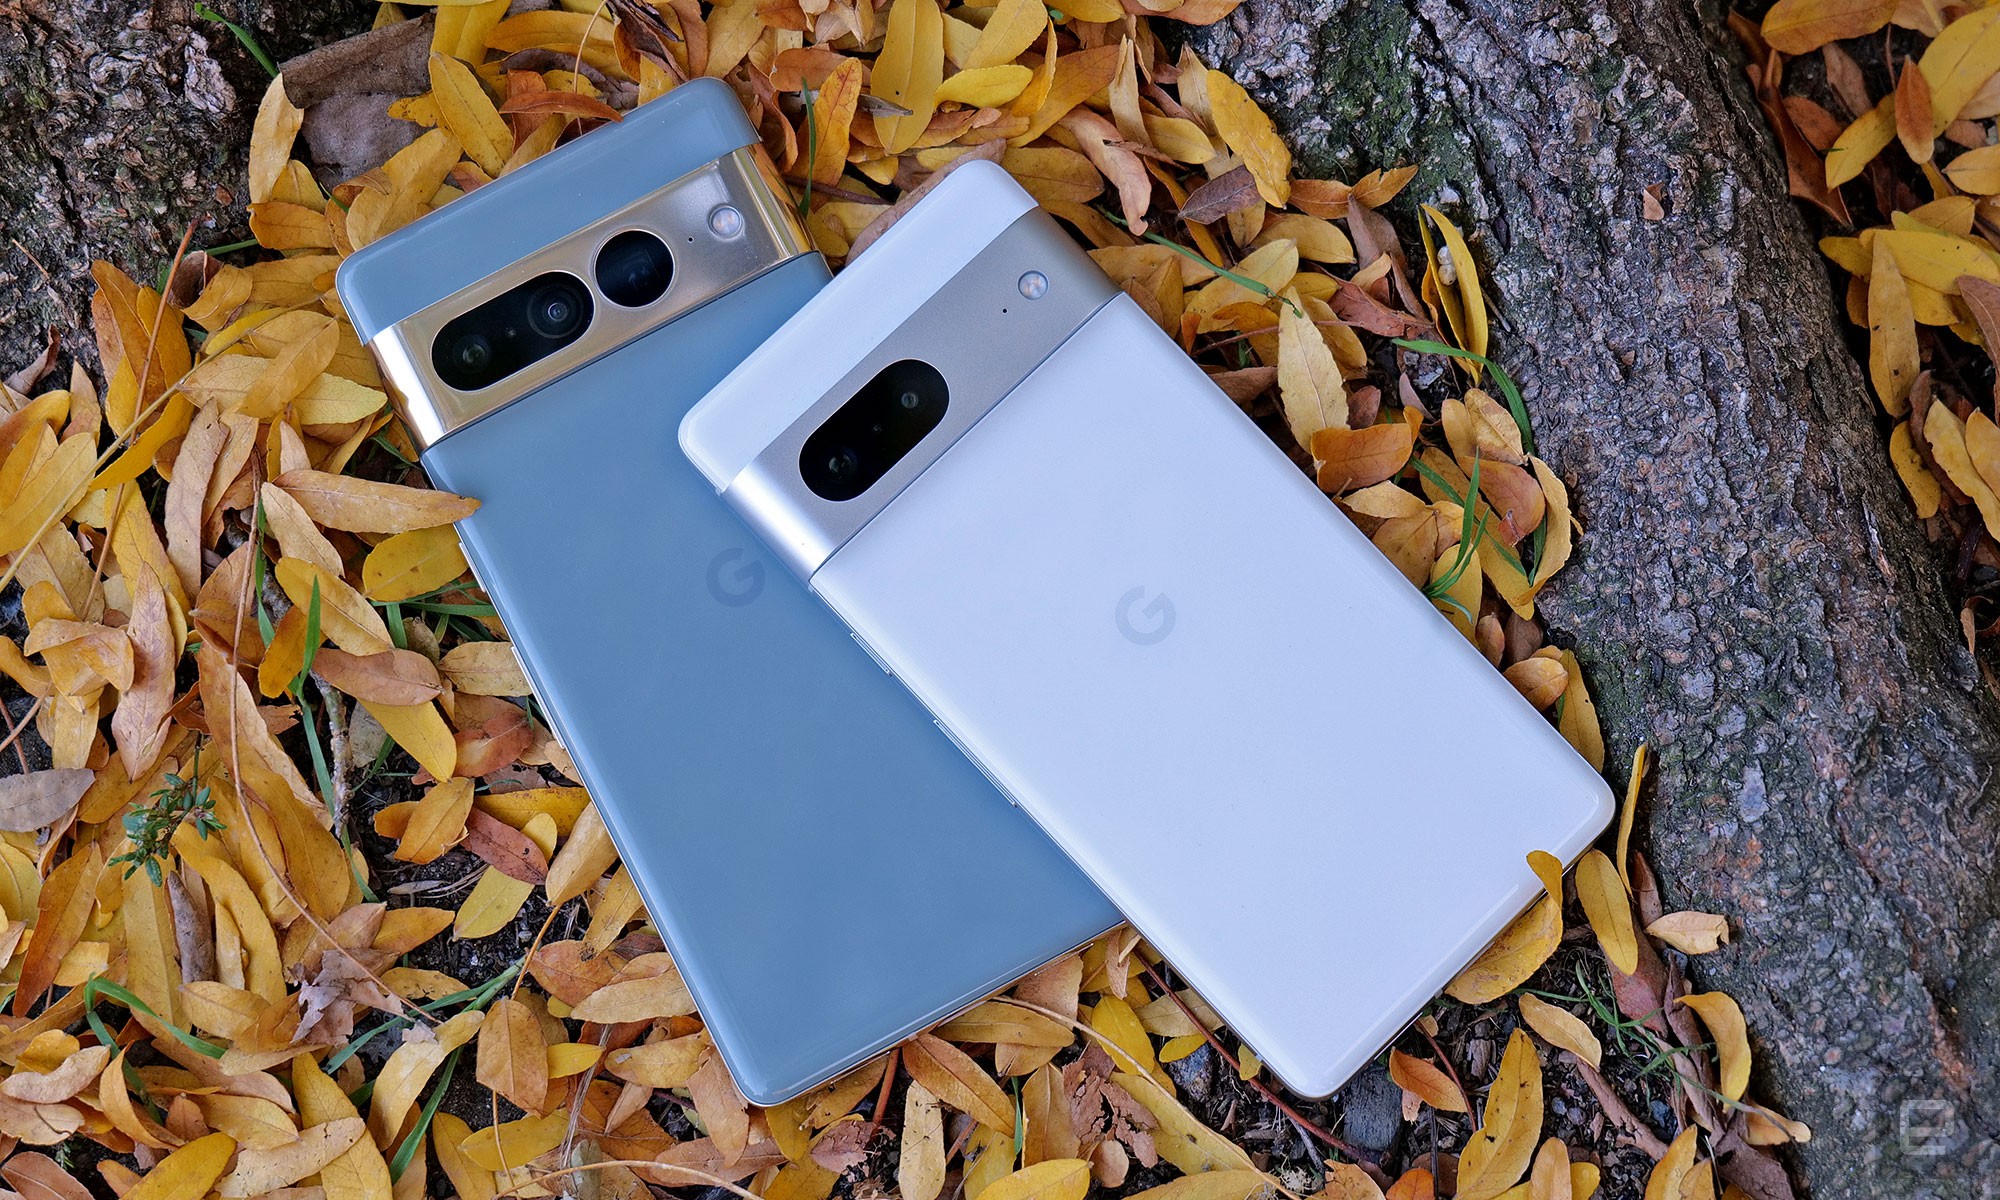 The Pixel 7 gets the same 50MP main sensor and 12MP ultra-wide sensor as last year's phones, with the Pixel 7 Pro getting a new slightly longer 5x telephoto cam. " data-uuid="9a976e04-1ec2-3a56-8261-055067d01324